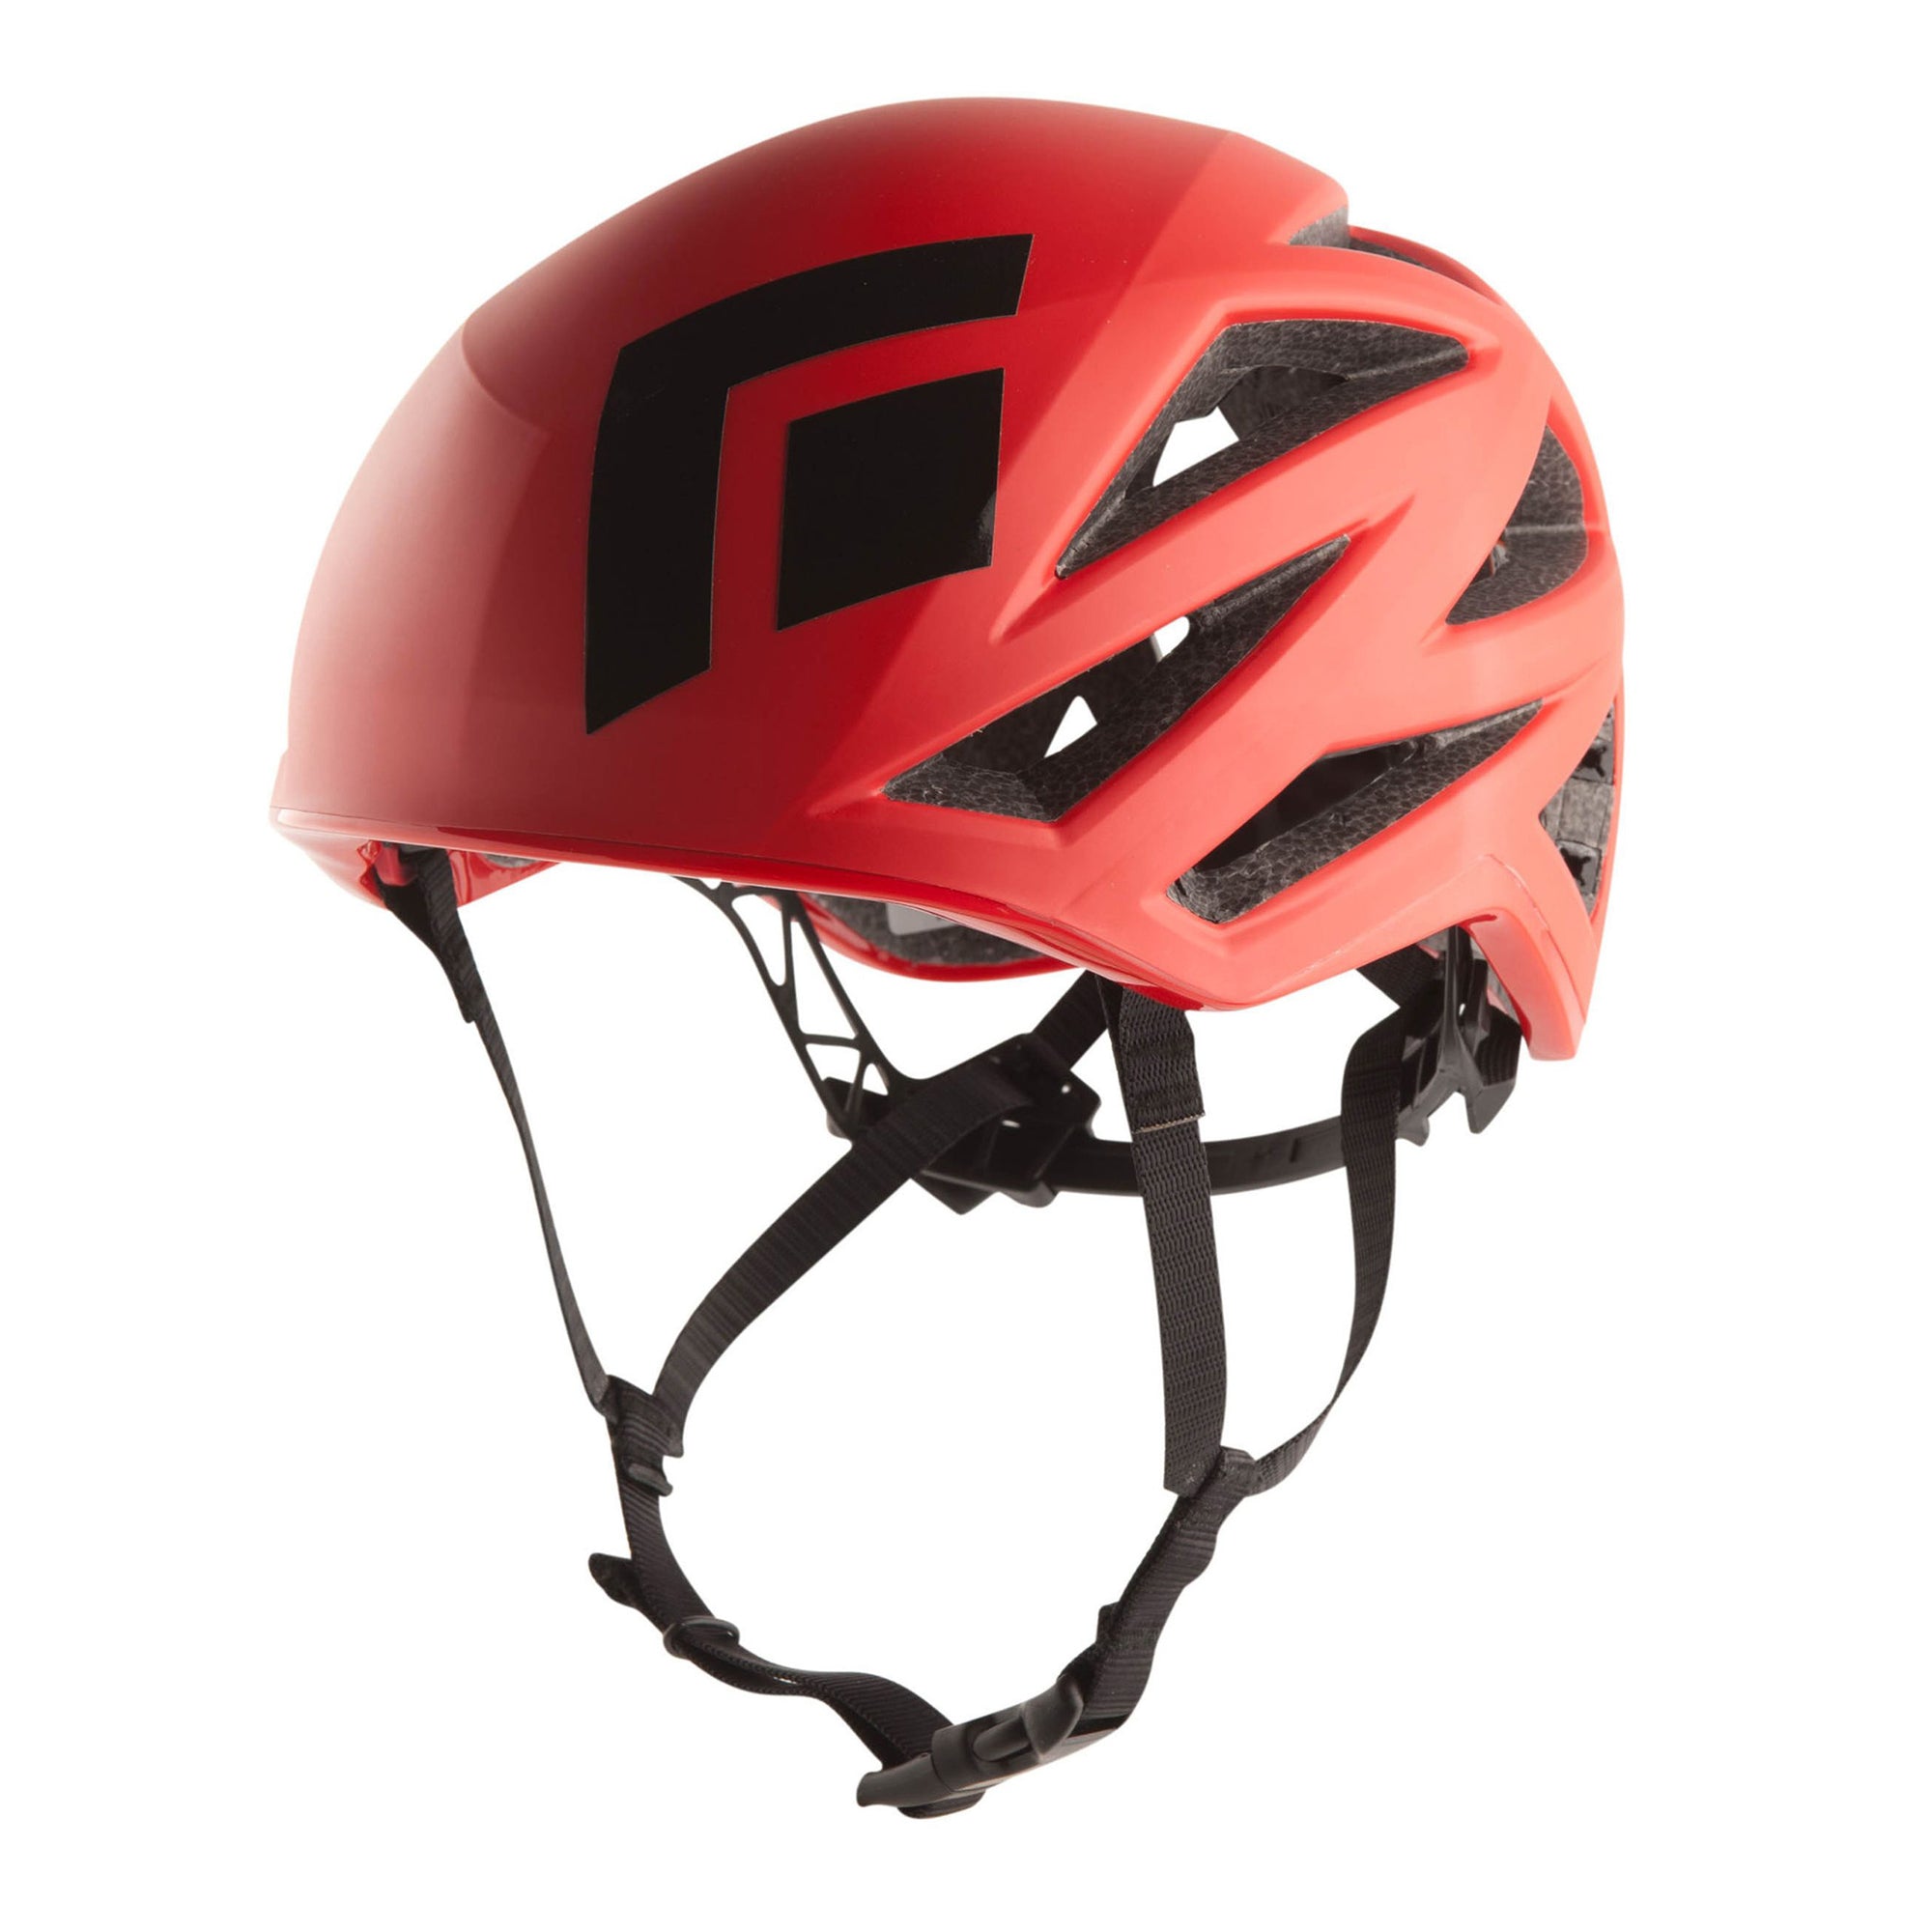 red helmet with straps and adjustment bar